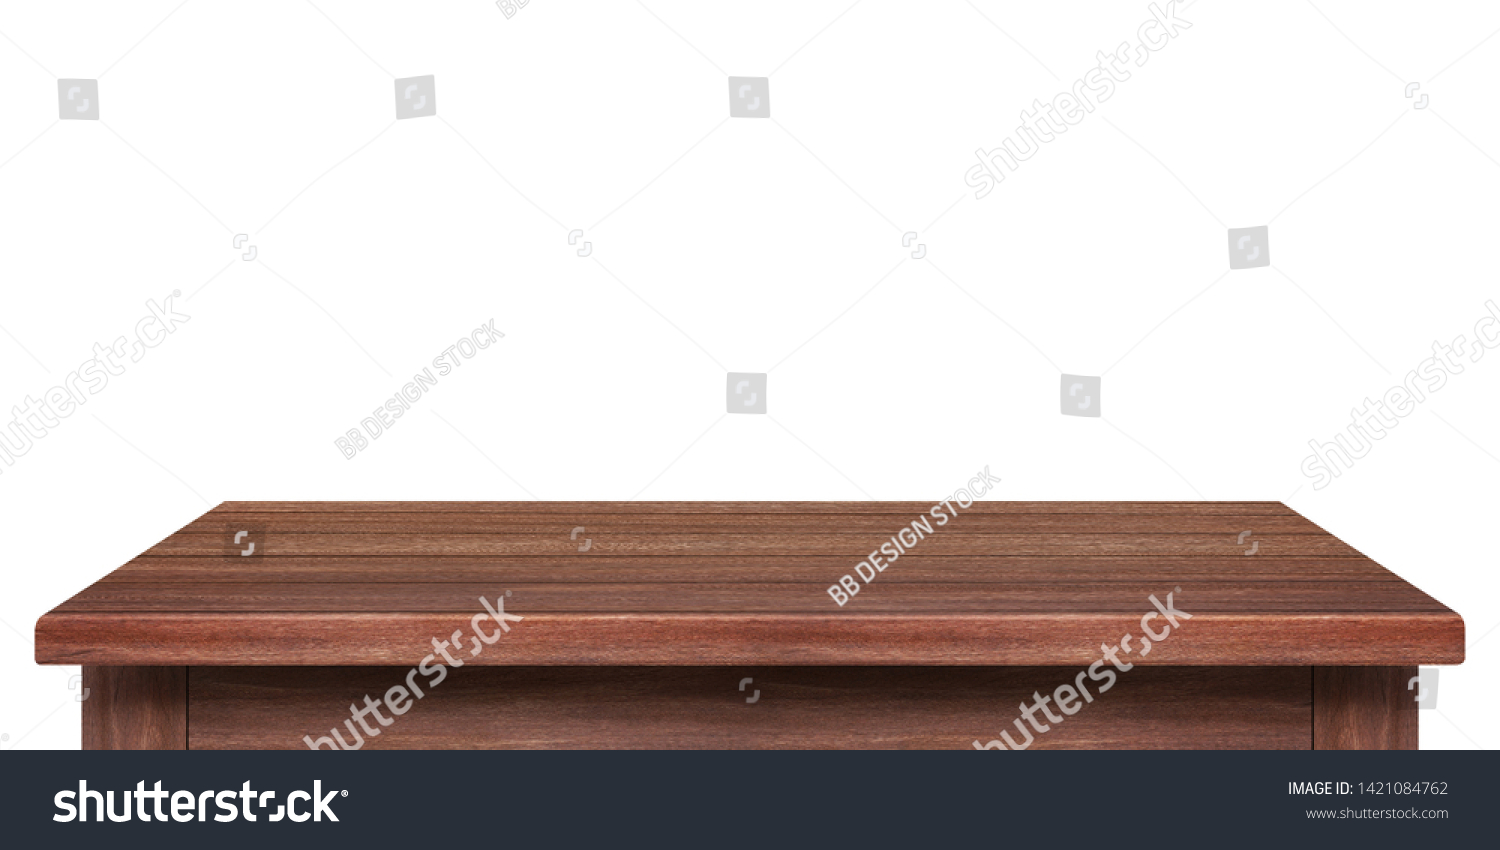 Empty wooden table isolated on white background, of free space for your copy and branding. Use as products display montage. Vintage style concept. #1421084762